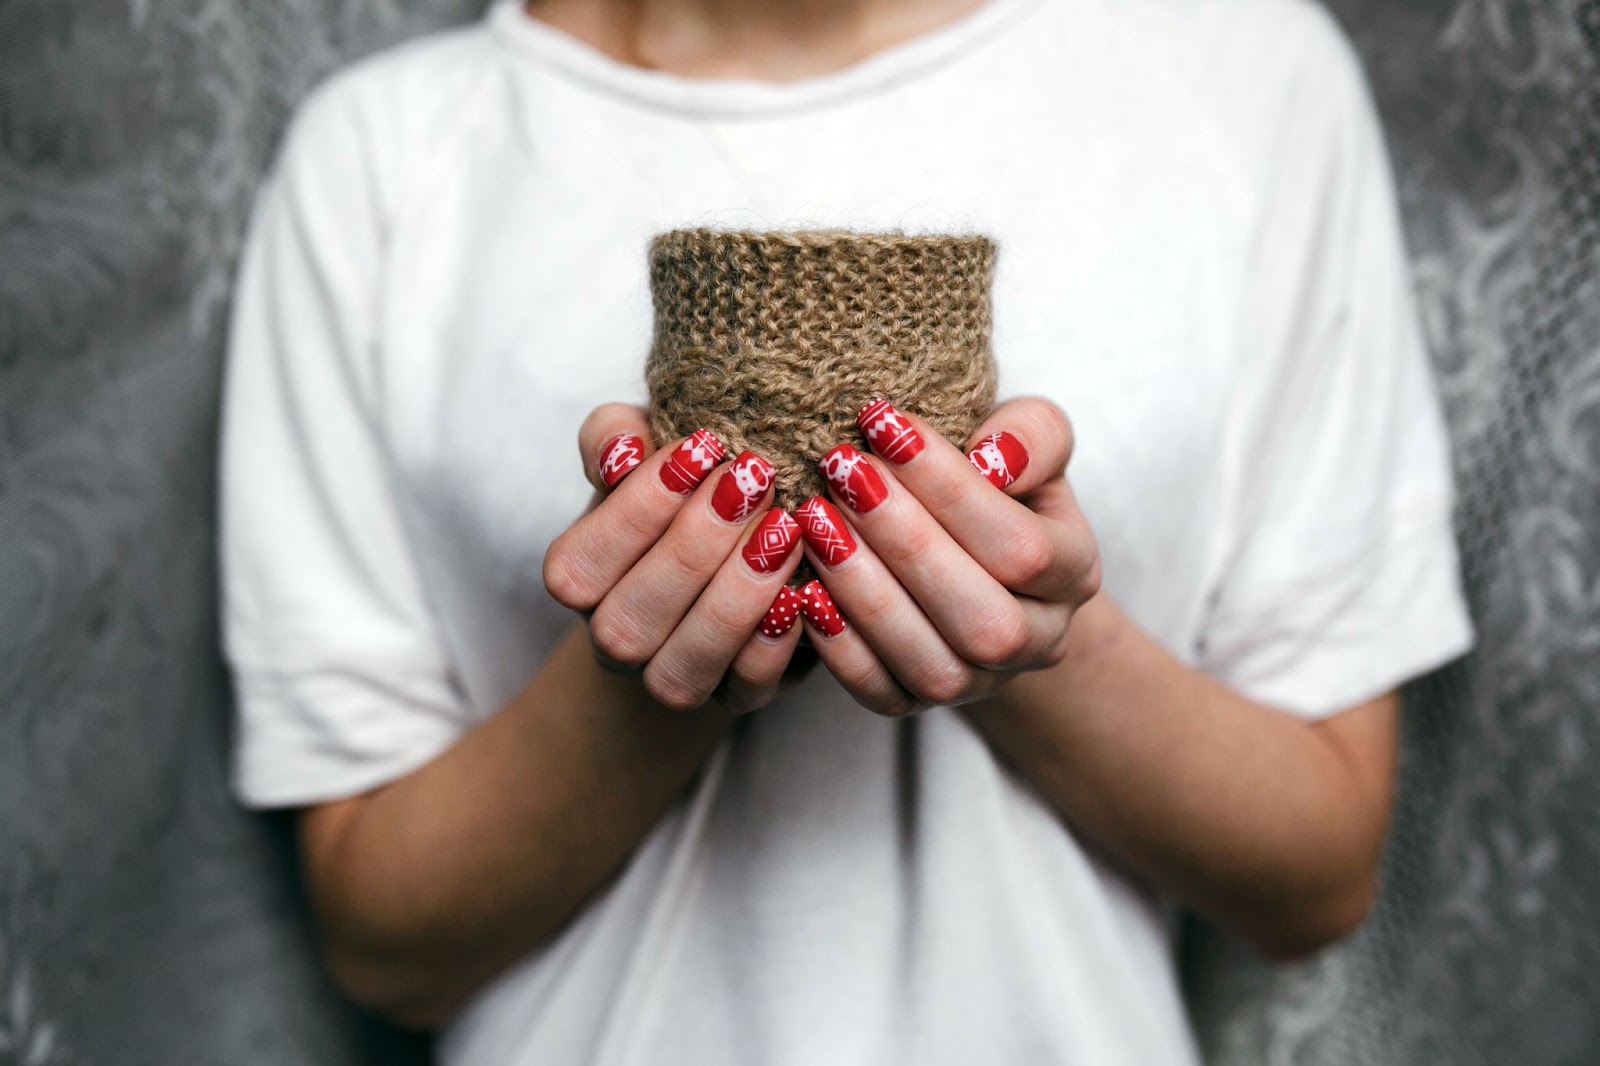 Person hold a candle with yarn knit on the outside and shows off red holiday nail art that features reindeer, sweater prints, and polka dots 